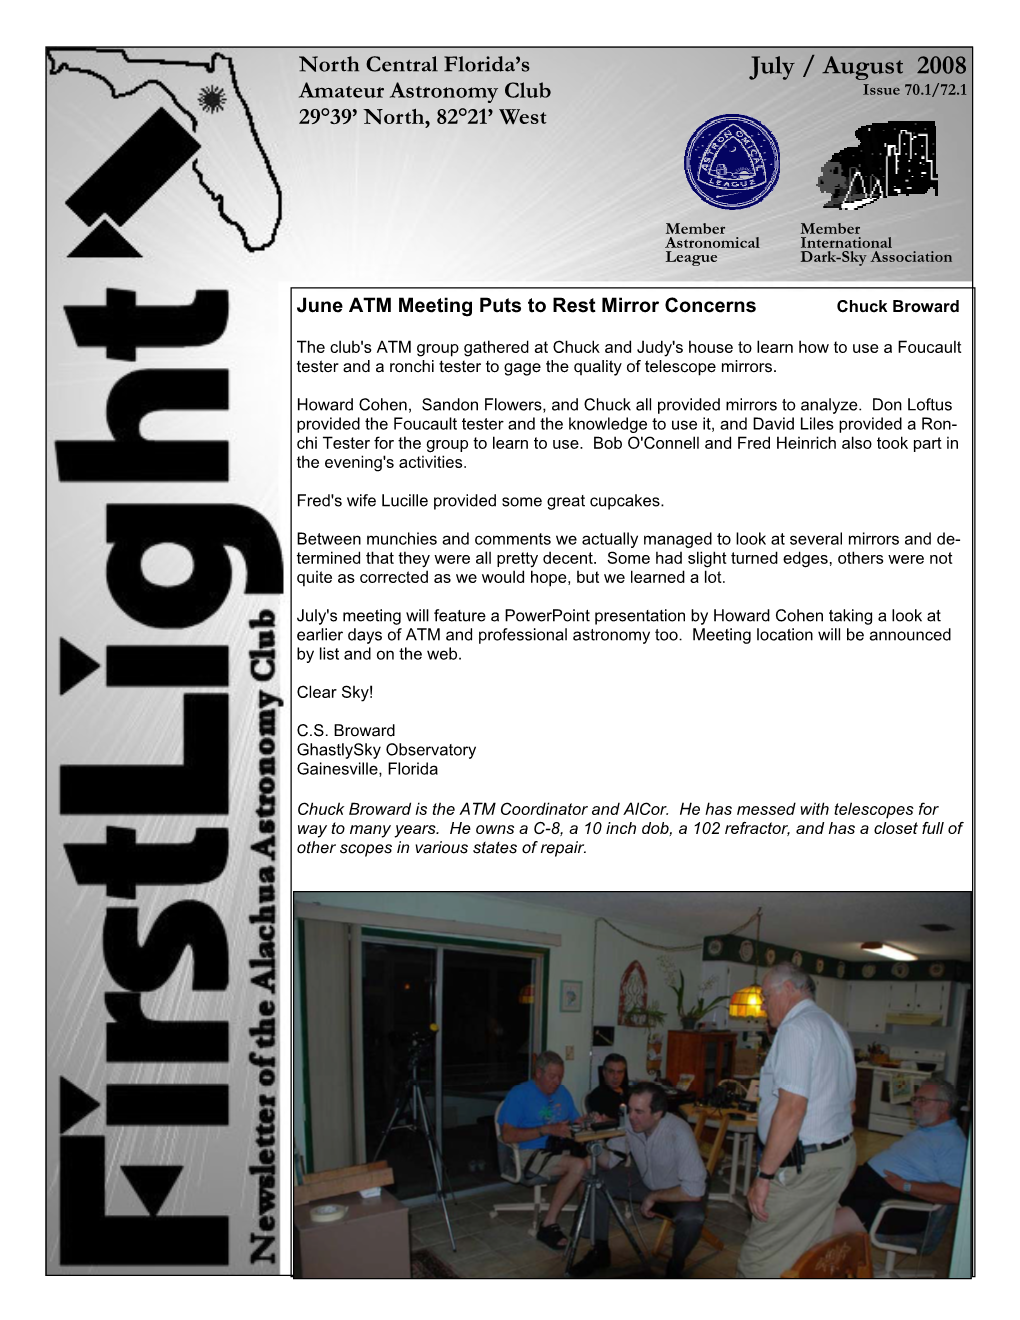 July / August 2008 Amateur Astronomy Club Issue 70.1/72.1 29°39’ North, 82°21’ West